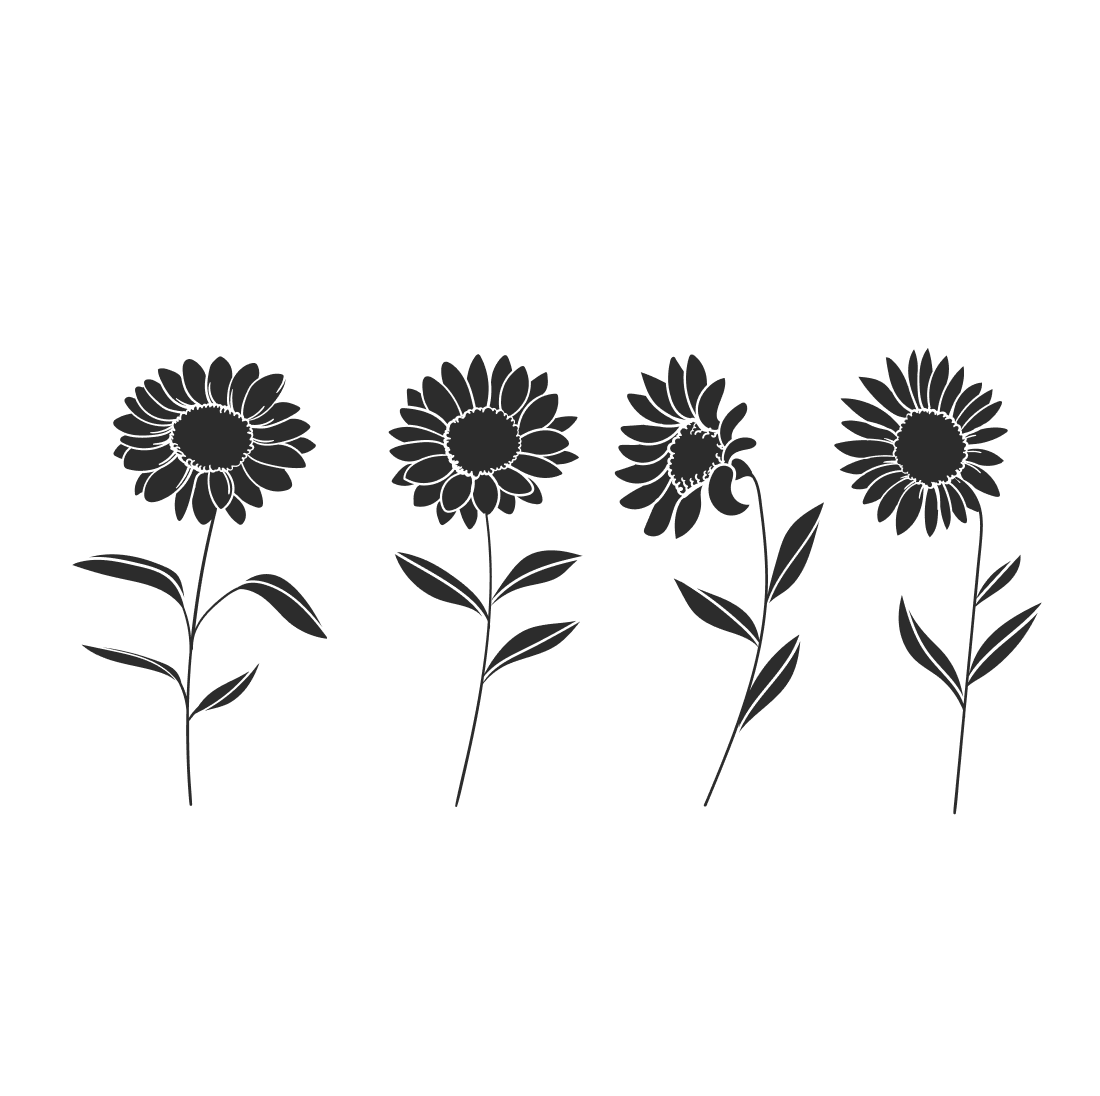 Silhouette Sunflower SVG cover.